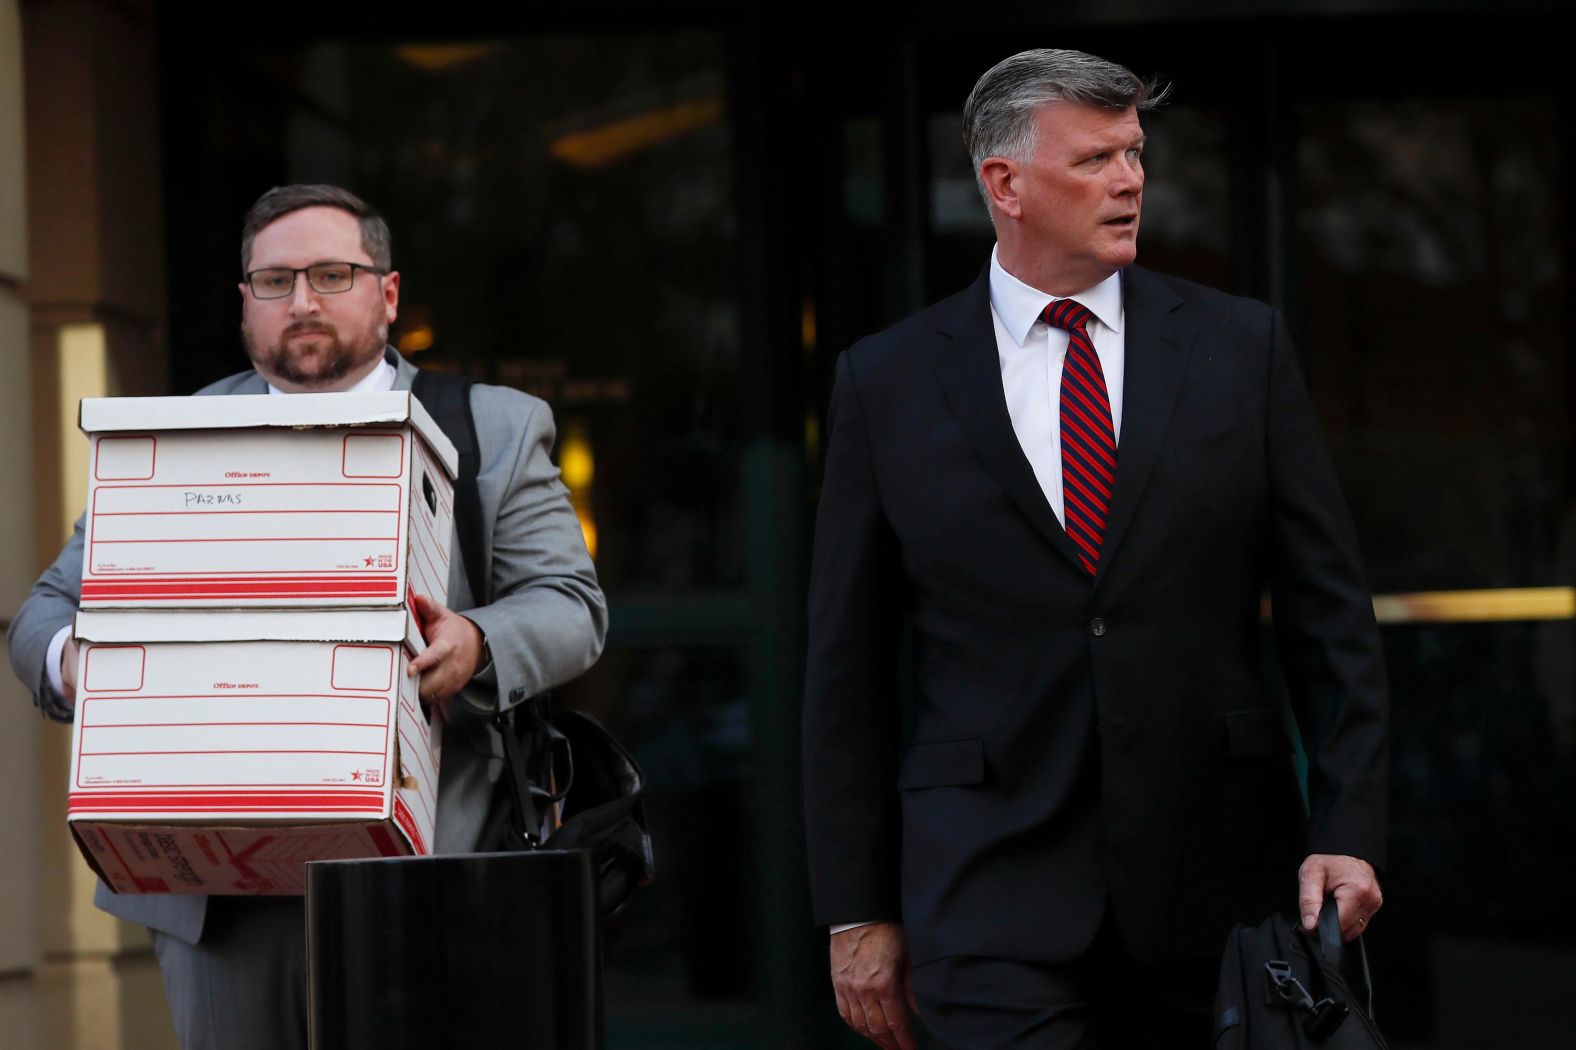 Kevin Downing, an attorney representing Lev Parnas and Igor Fruman, leaves a federal courthouse in Alexandria, Virginia, on October 10. House Democrats <a href="index.php?page=&url=https%3A%2F%2Fwww.cnn.com%2F2019%2F10%2F10%2Fpolitics%2Fsubpoenas-lev-parnas-igor-fruman%2Findex.html" target="_blank">issued subpoenas to Parnas and Fruman,</a> who worked with Trump's personal attorney Rudy Giuliani to dig up dirt on the Bidens. Parnas and Fruman <a href="index.php?page=&url=https%3A%2F%2Fwww.cnn.com%2F2019%2F10%2F10%2Fpolitics%2Fguliani-client-arrested-campaign-finance%2Findex.html" target="_blank">were indicted by federal prosecutors</a> on the same day. The subpoenas are separate from the indictment, which alleges that Parnas and Fruman illegally funneled foreign money into US elections.